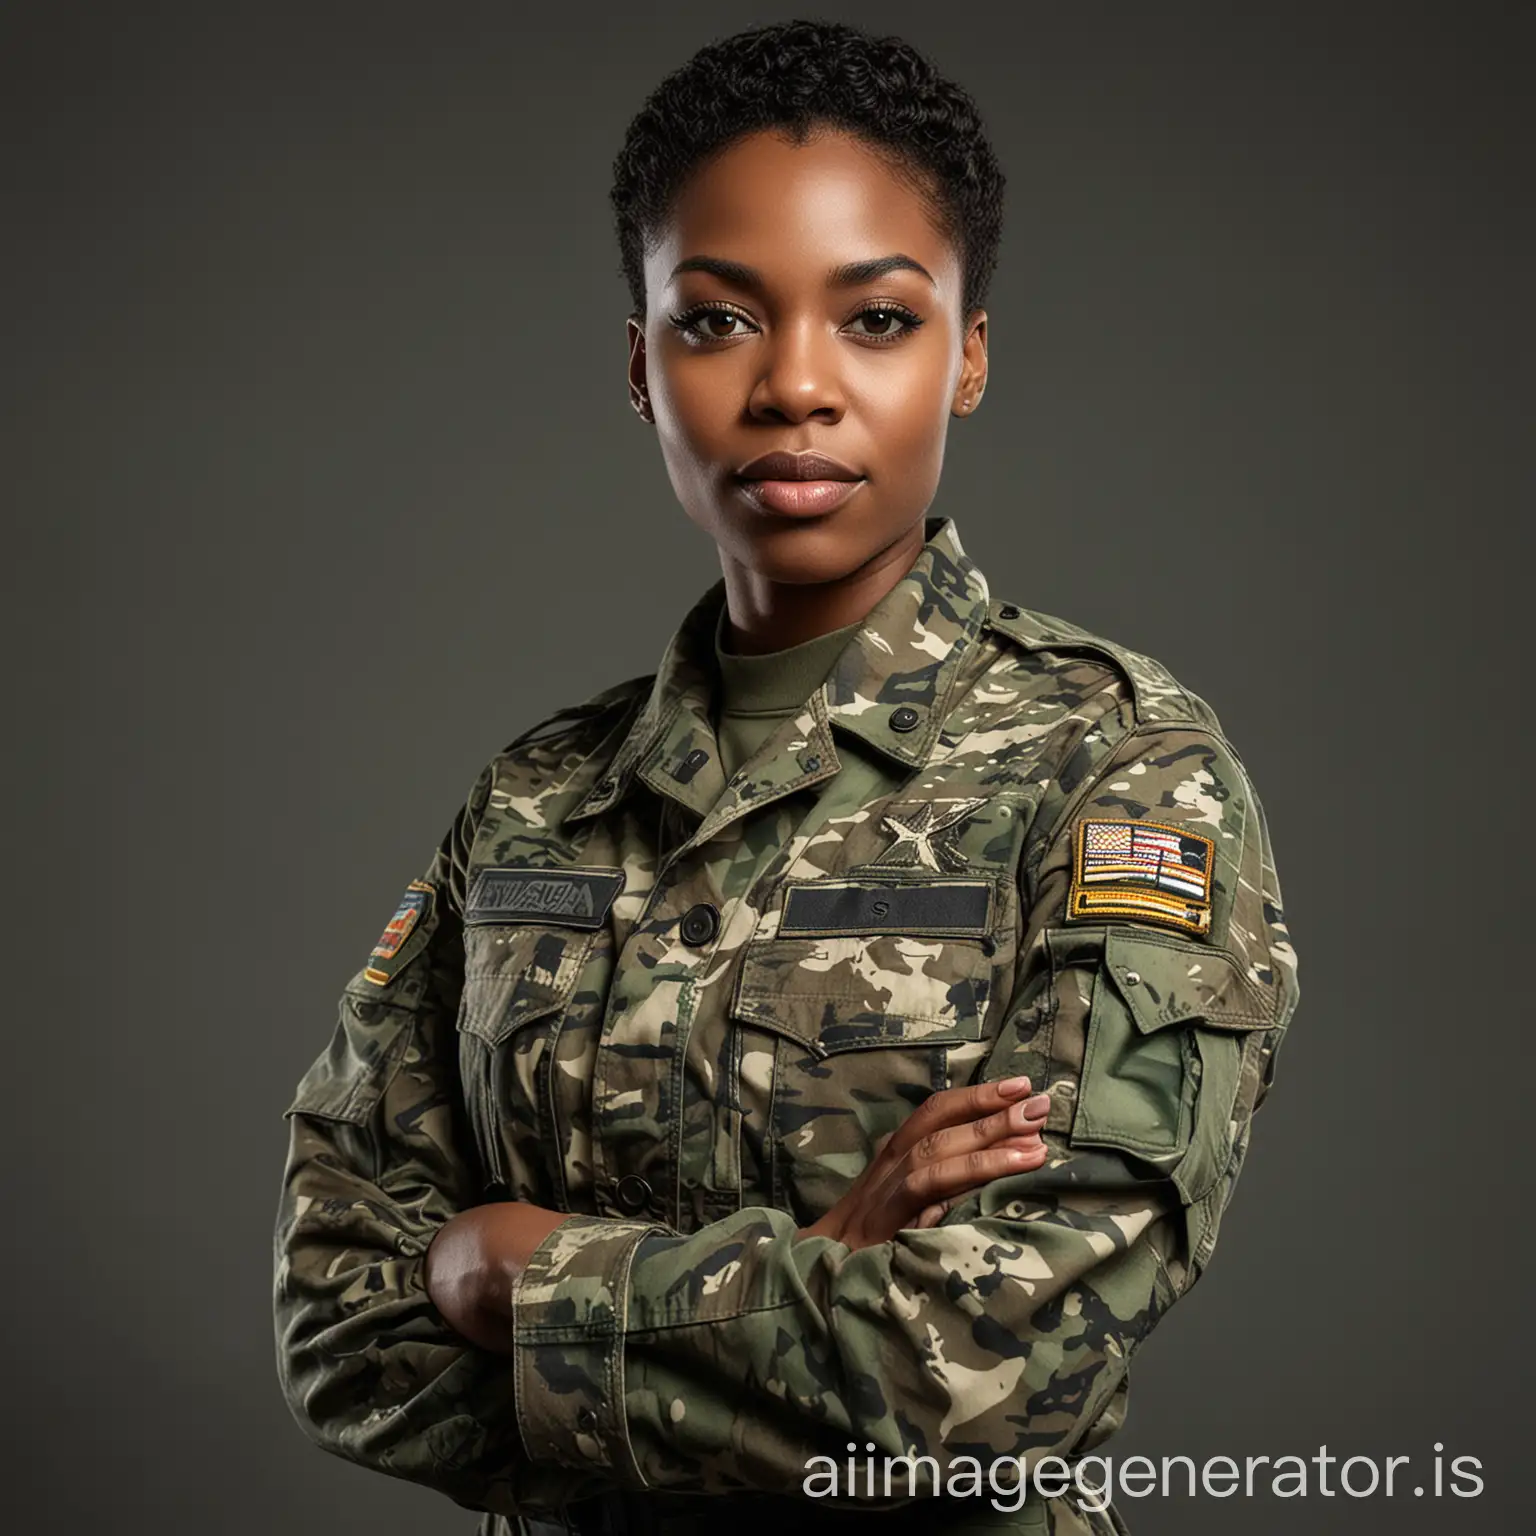 black woman wearing military camouflage uniform in full dress